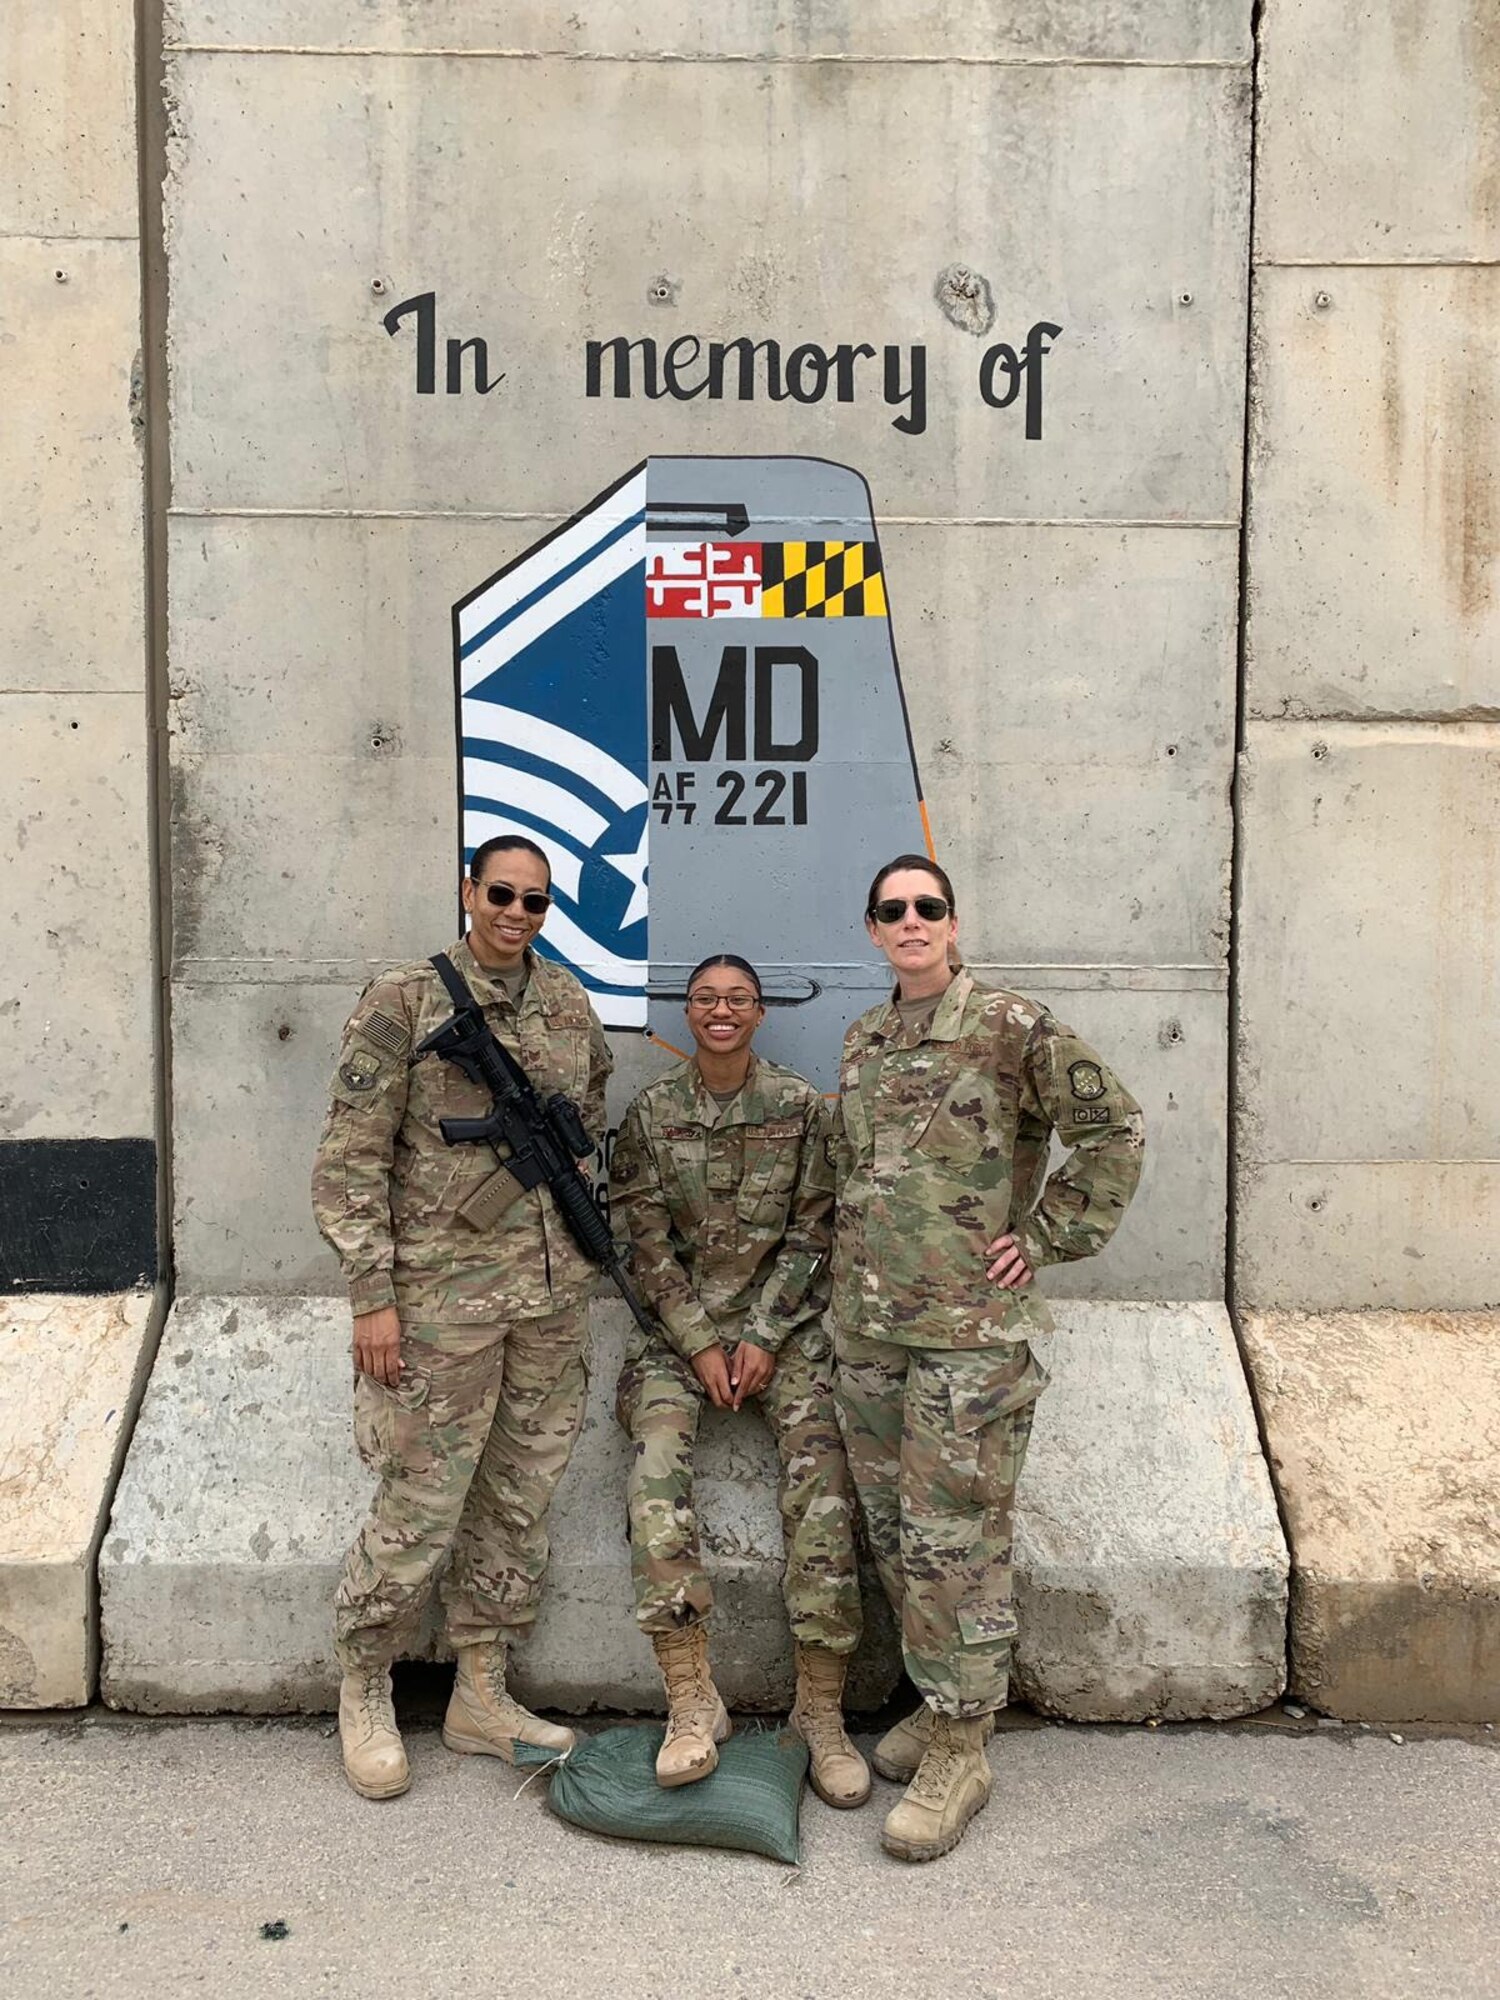 (From left) Tech. Sgt. Lindsey Bryant, Airman 1st Class Bria Bailey, and Senior Airman Jayme Bradley, Airmen assigned to the 175th Maintenance Squadron, Maryland National Guard, pose for a photo in front of a memorial April 16, 2019, during her deployment to Kandahar, Afghanistan.